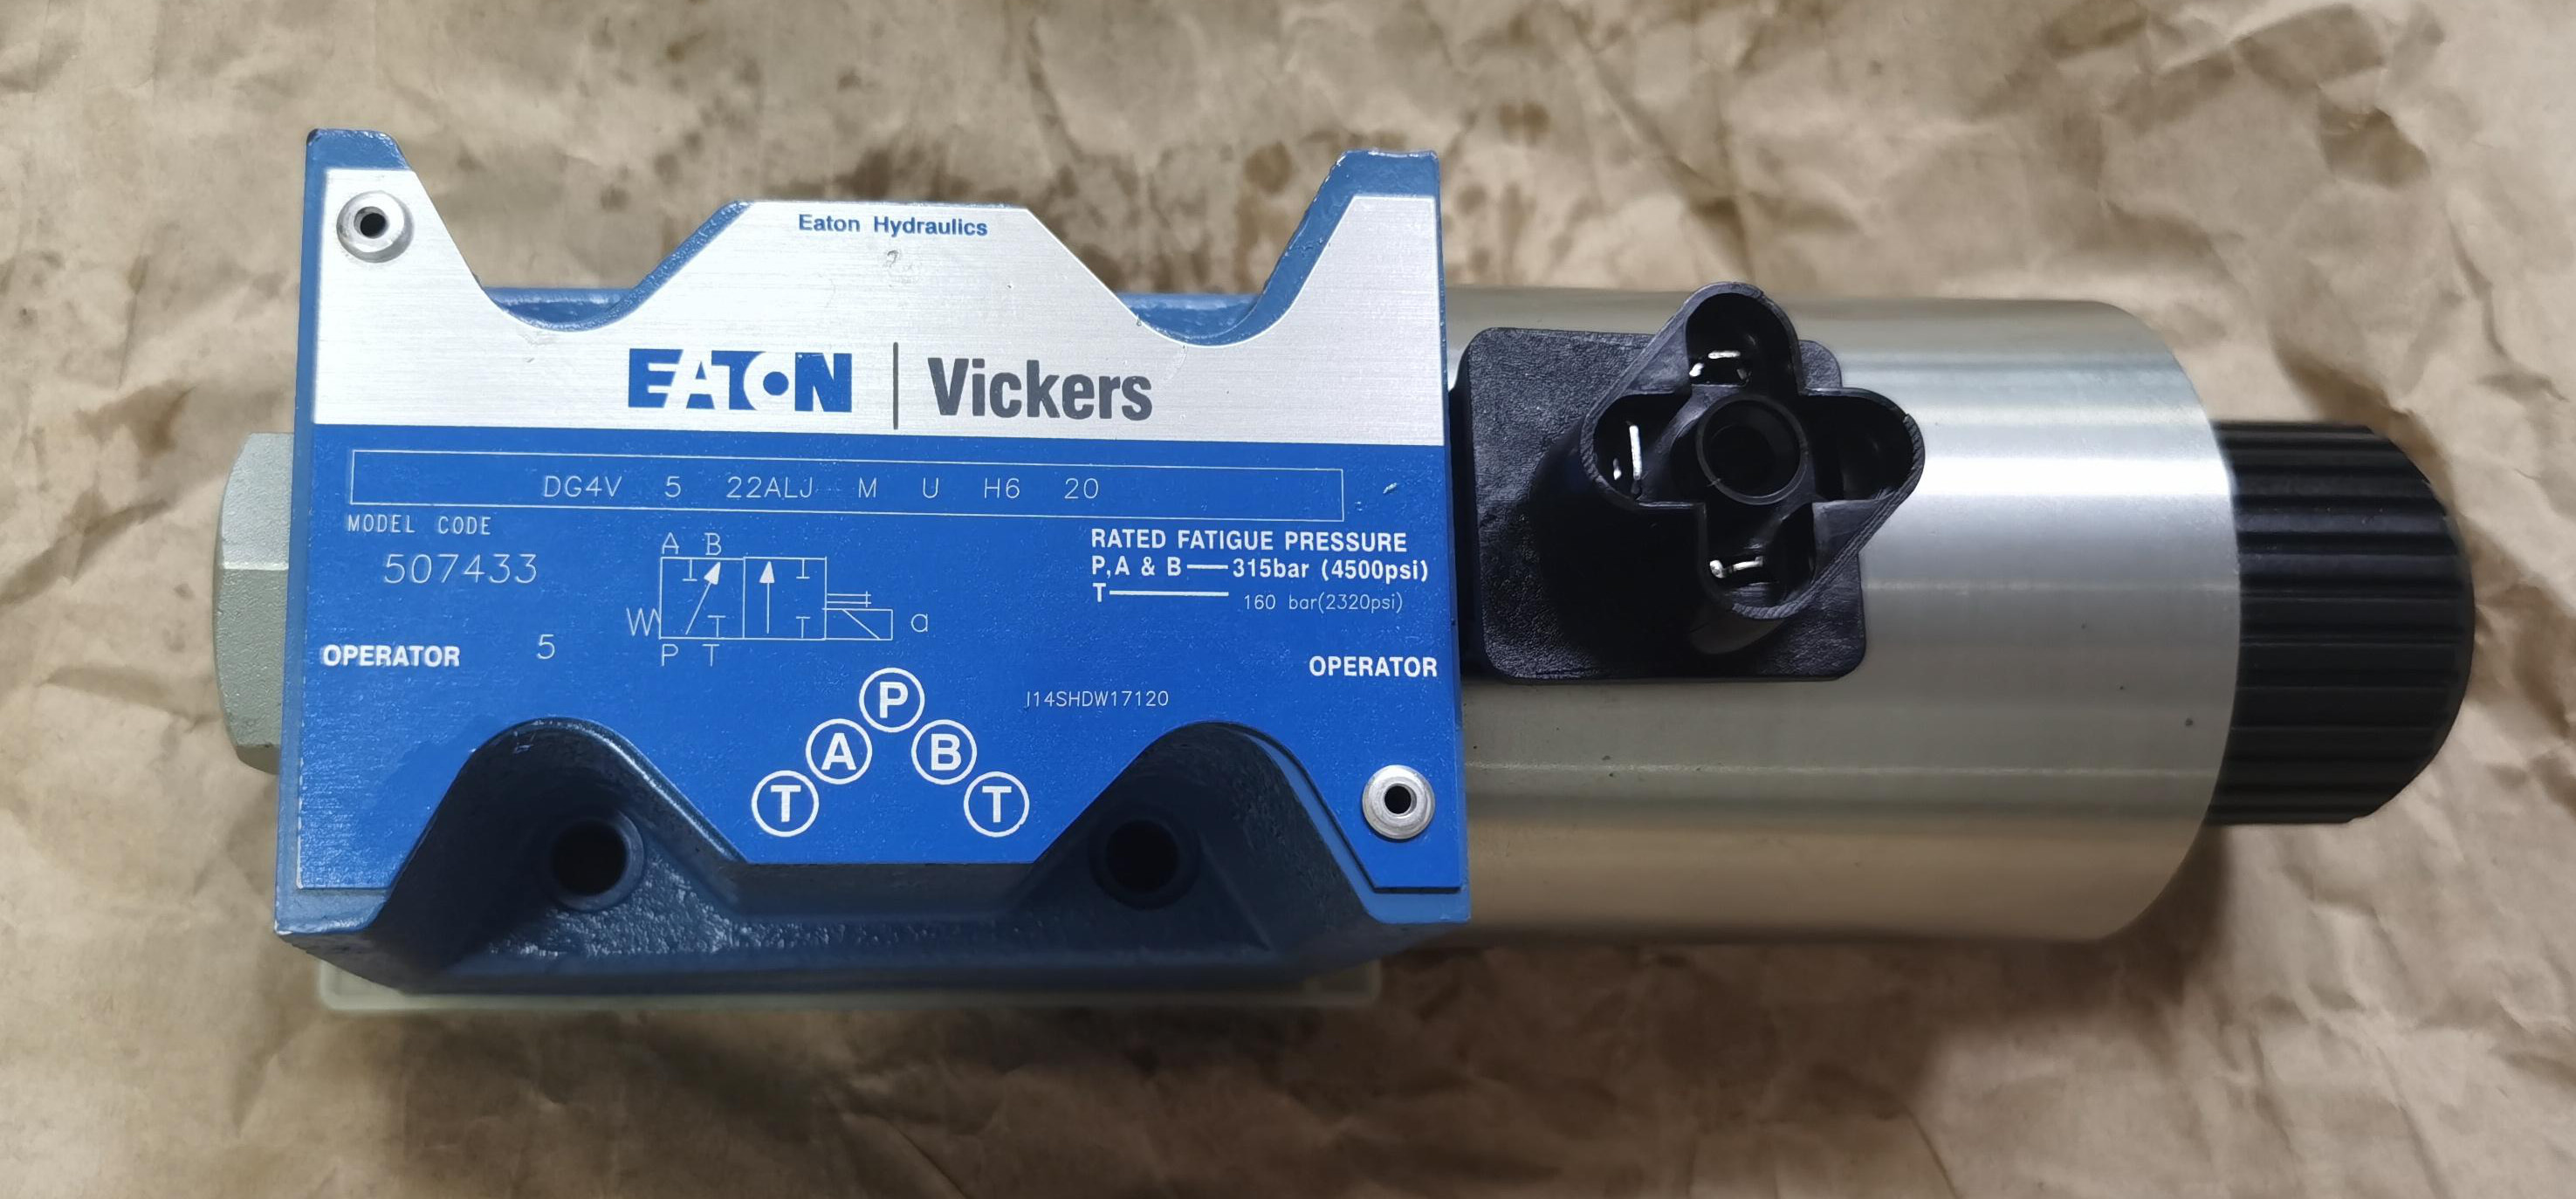 Eaton Vickers DG4V-5-22ALJ-M-U-H6-20 Solenoid Operated Diectional Control Valve for sale